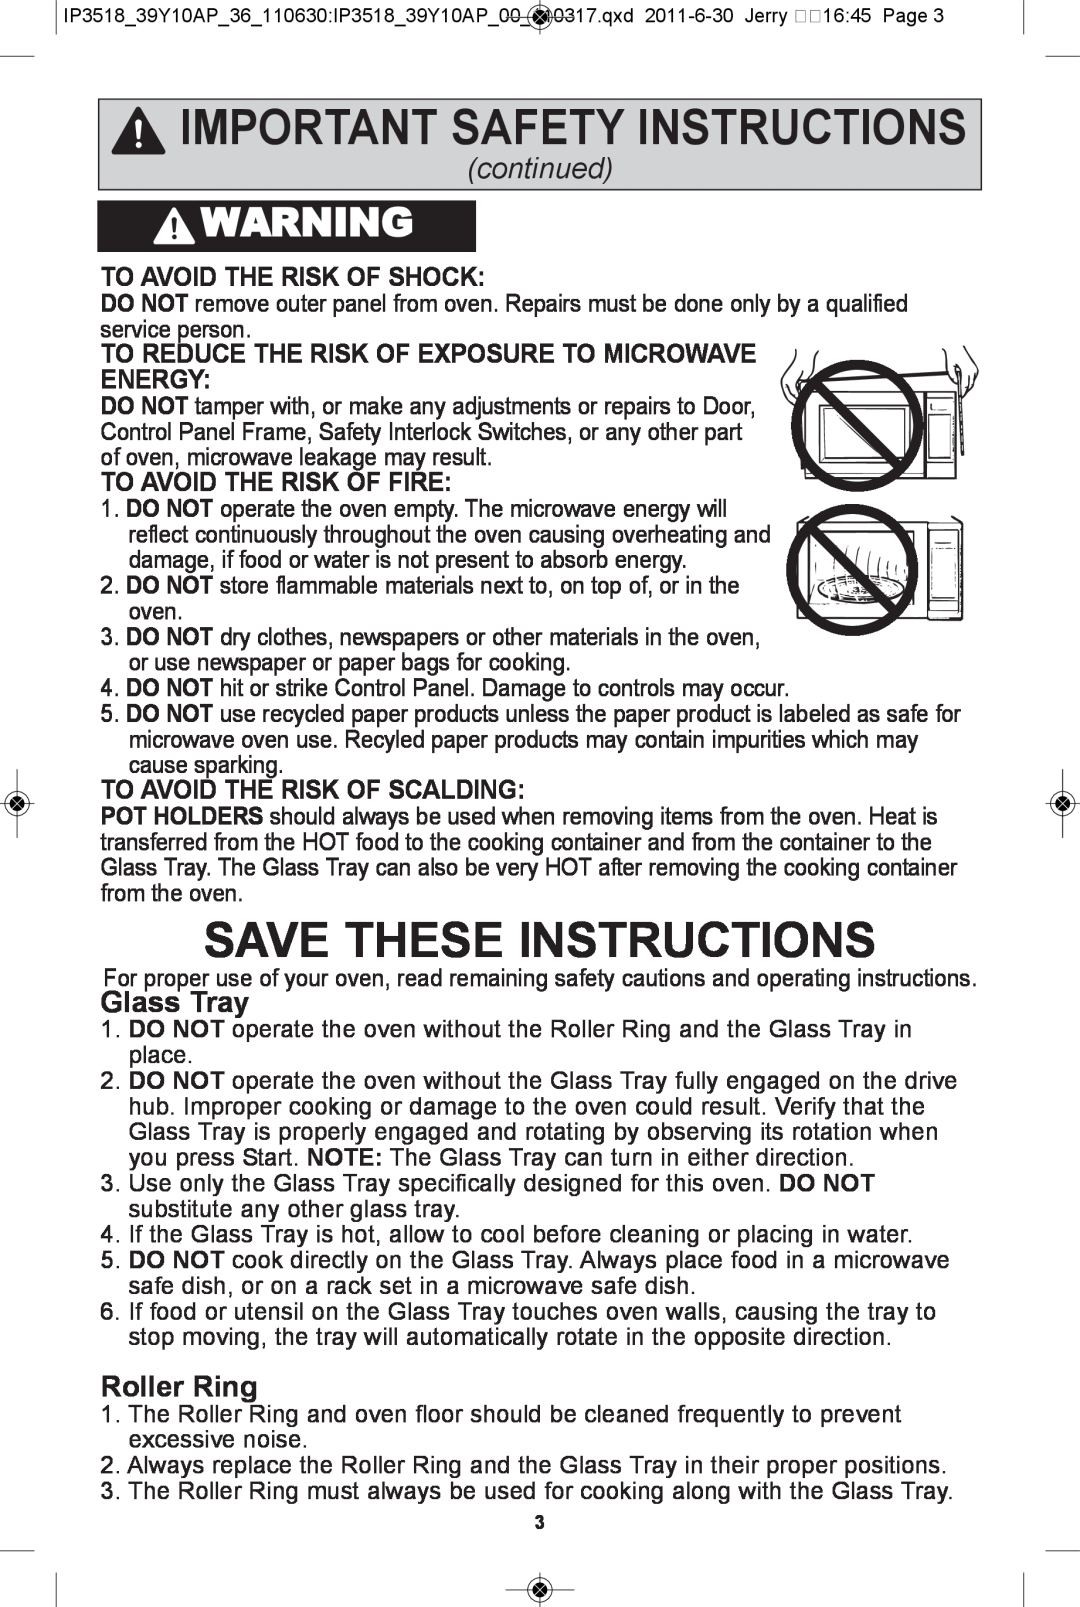 Panasonic NN-SA631B save these instructions, roller ring, to avoid the risK of shocK, to avoid the risK of fire, continued 